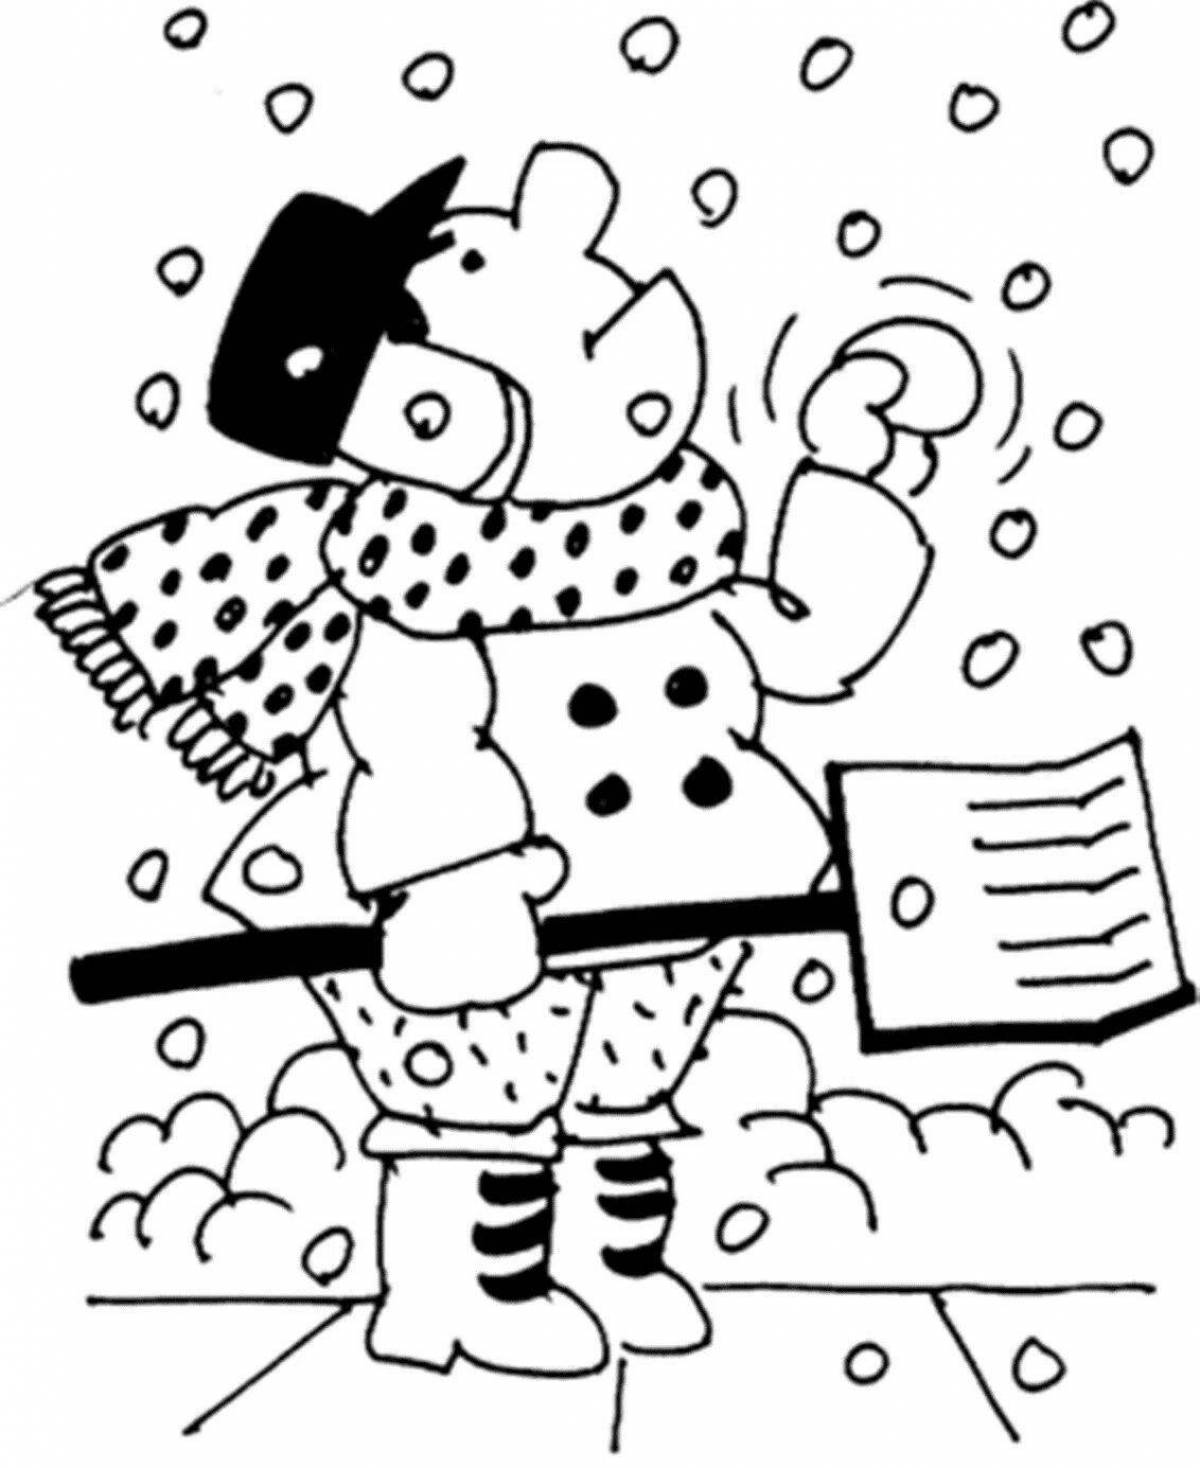 Coloring pages splendid it's snowing for kids